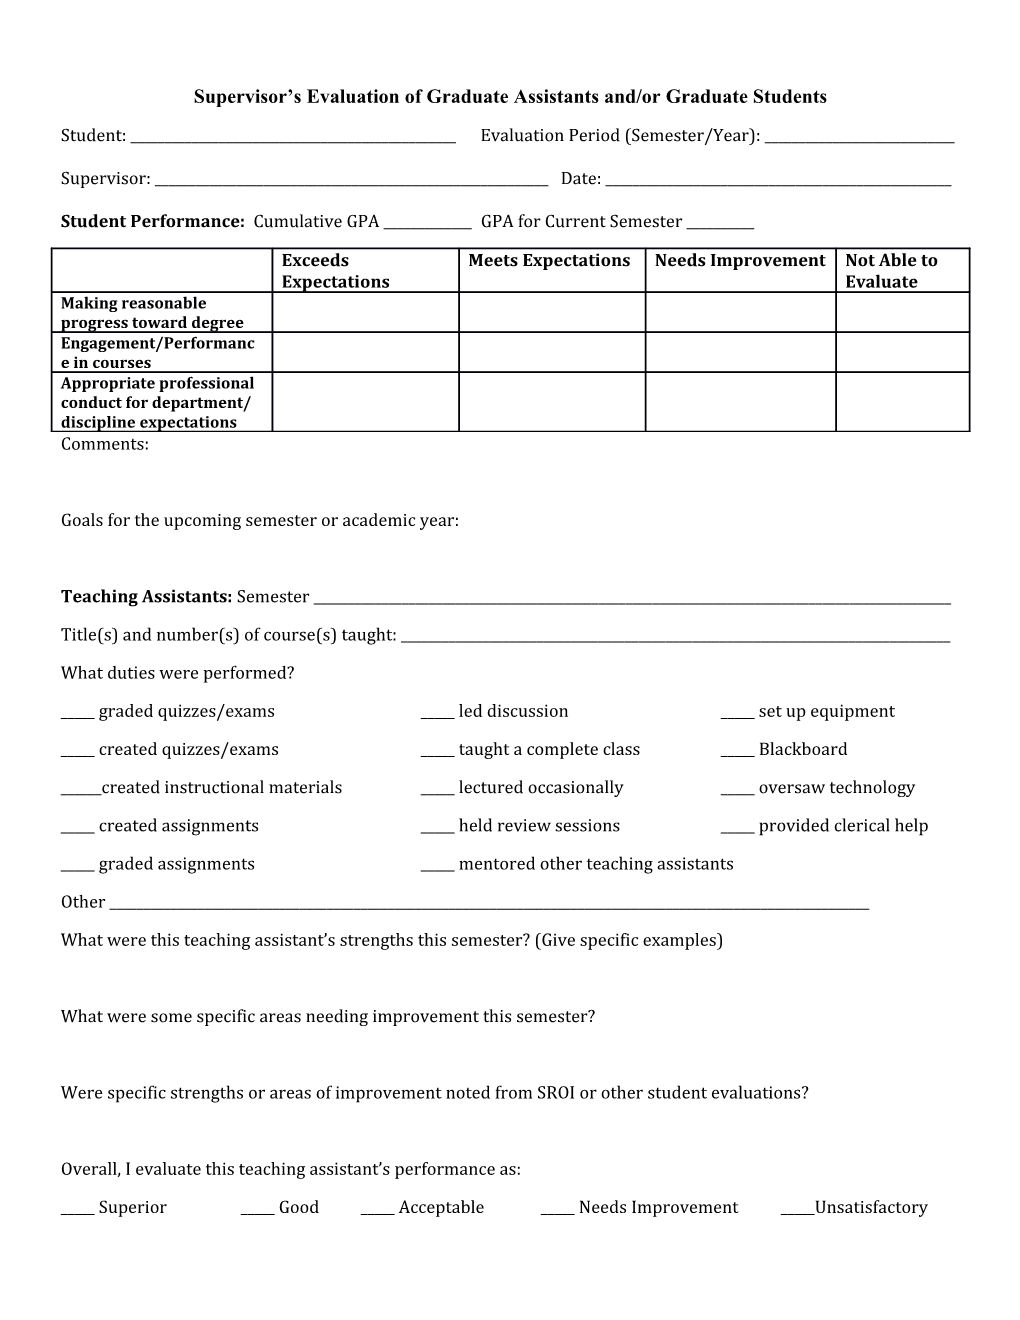 Supervisor S Evaluation of Graduate Assistants And/Or Graduate Students